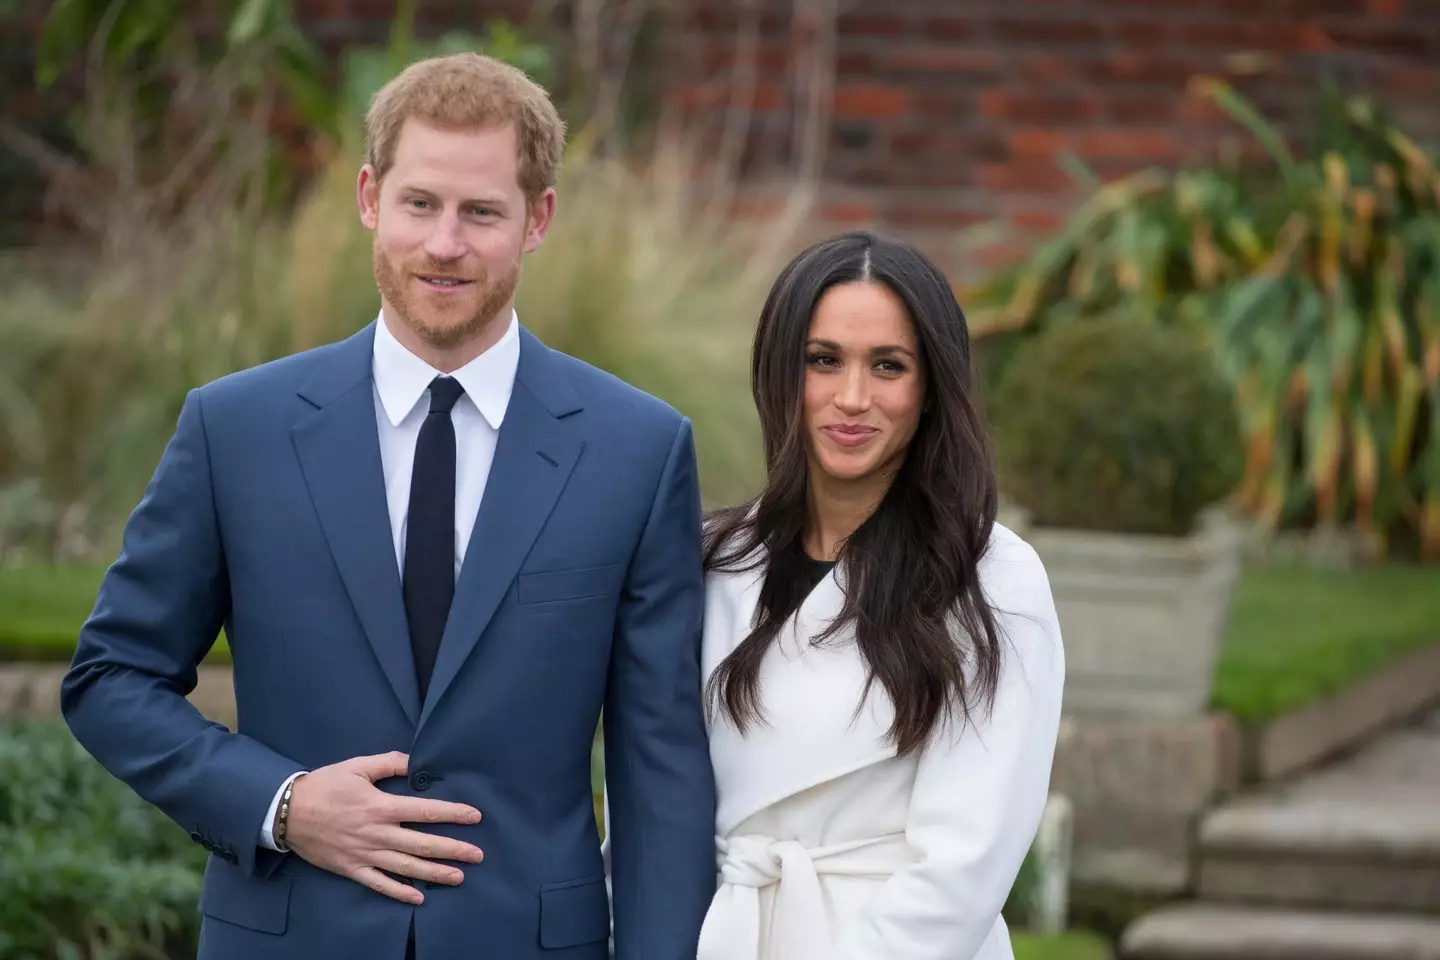 Prince Harry and Meghan Markle no longer take part in royal duties.